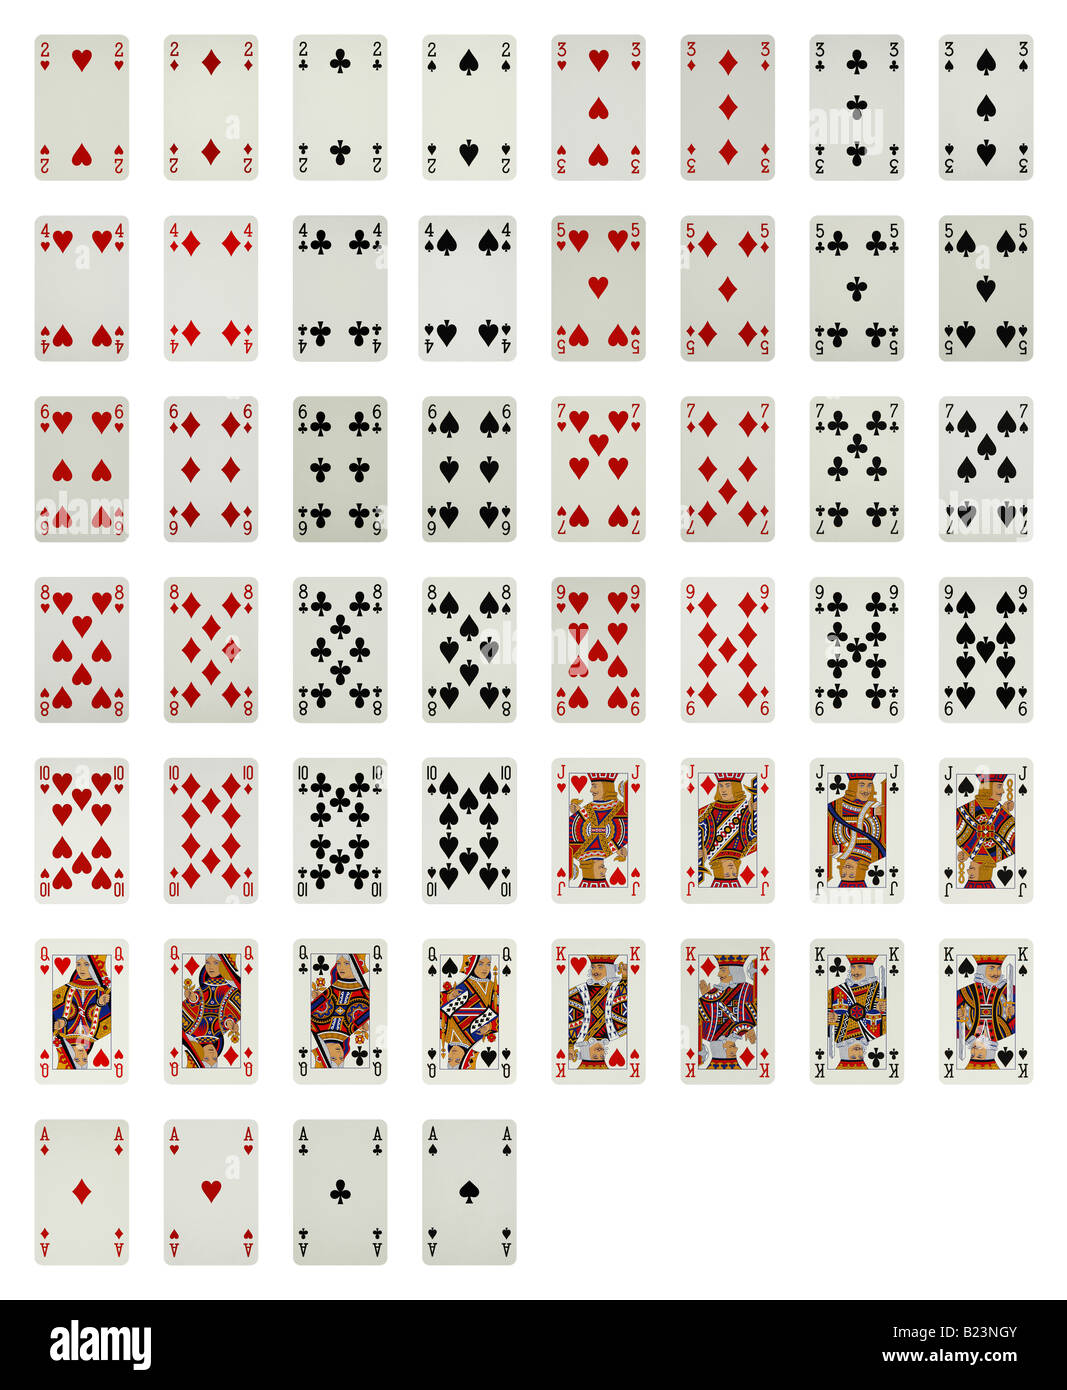 How Many Spades Are In A Deck Of Cards - Printable Cards